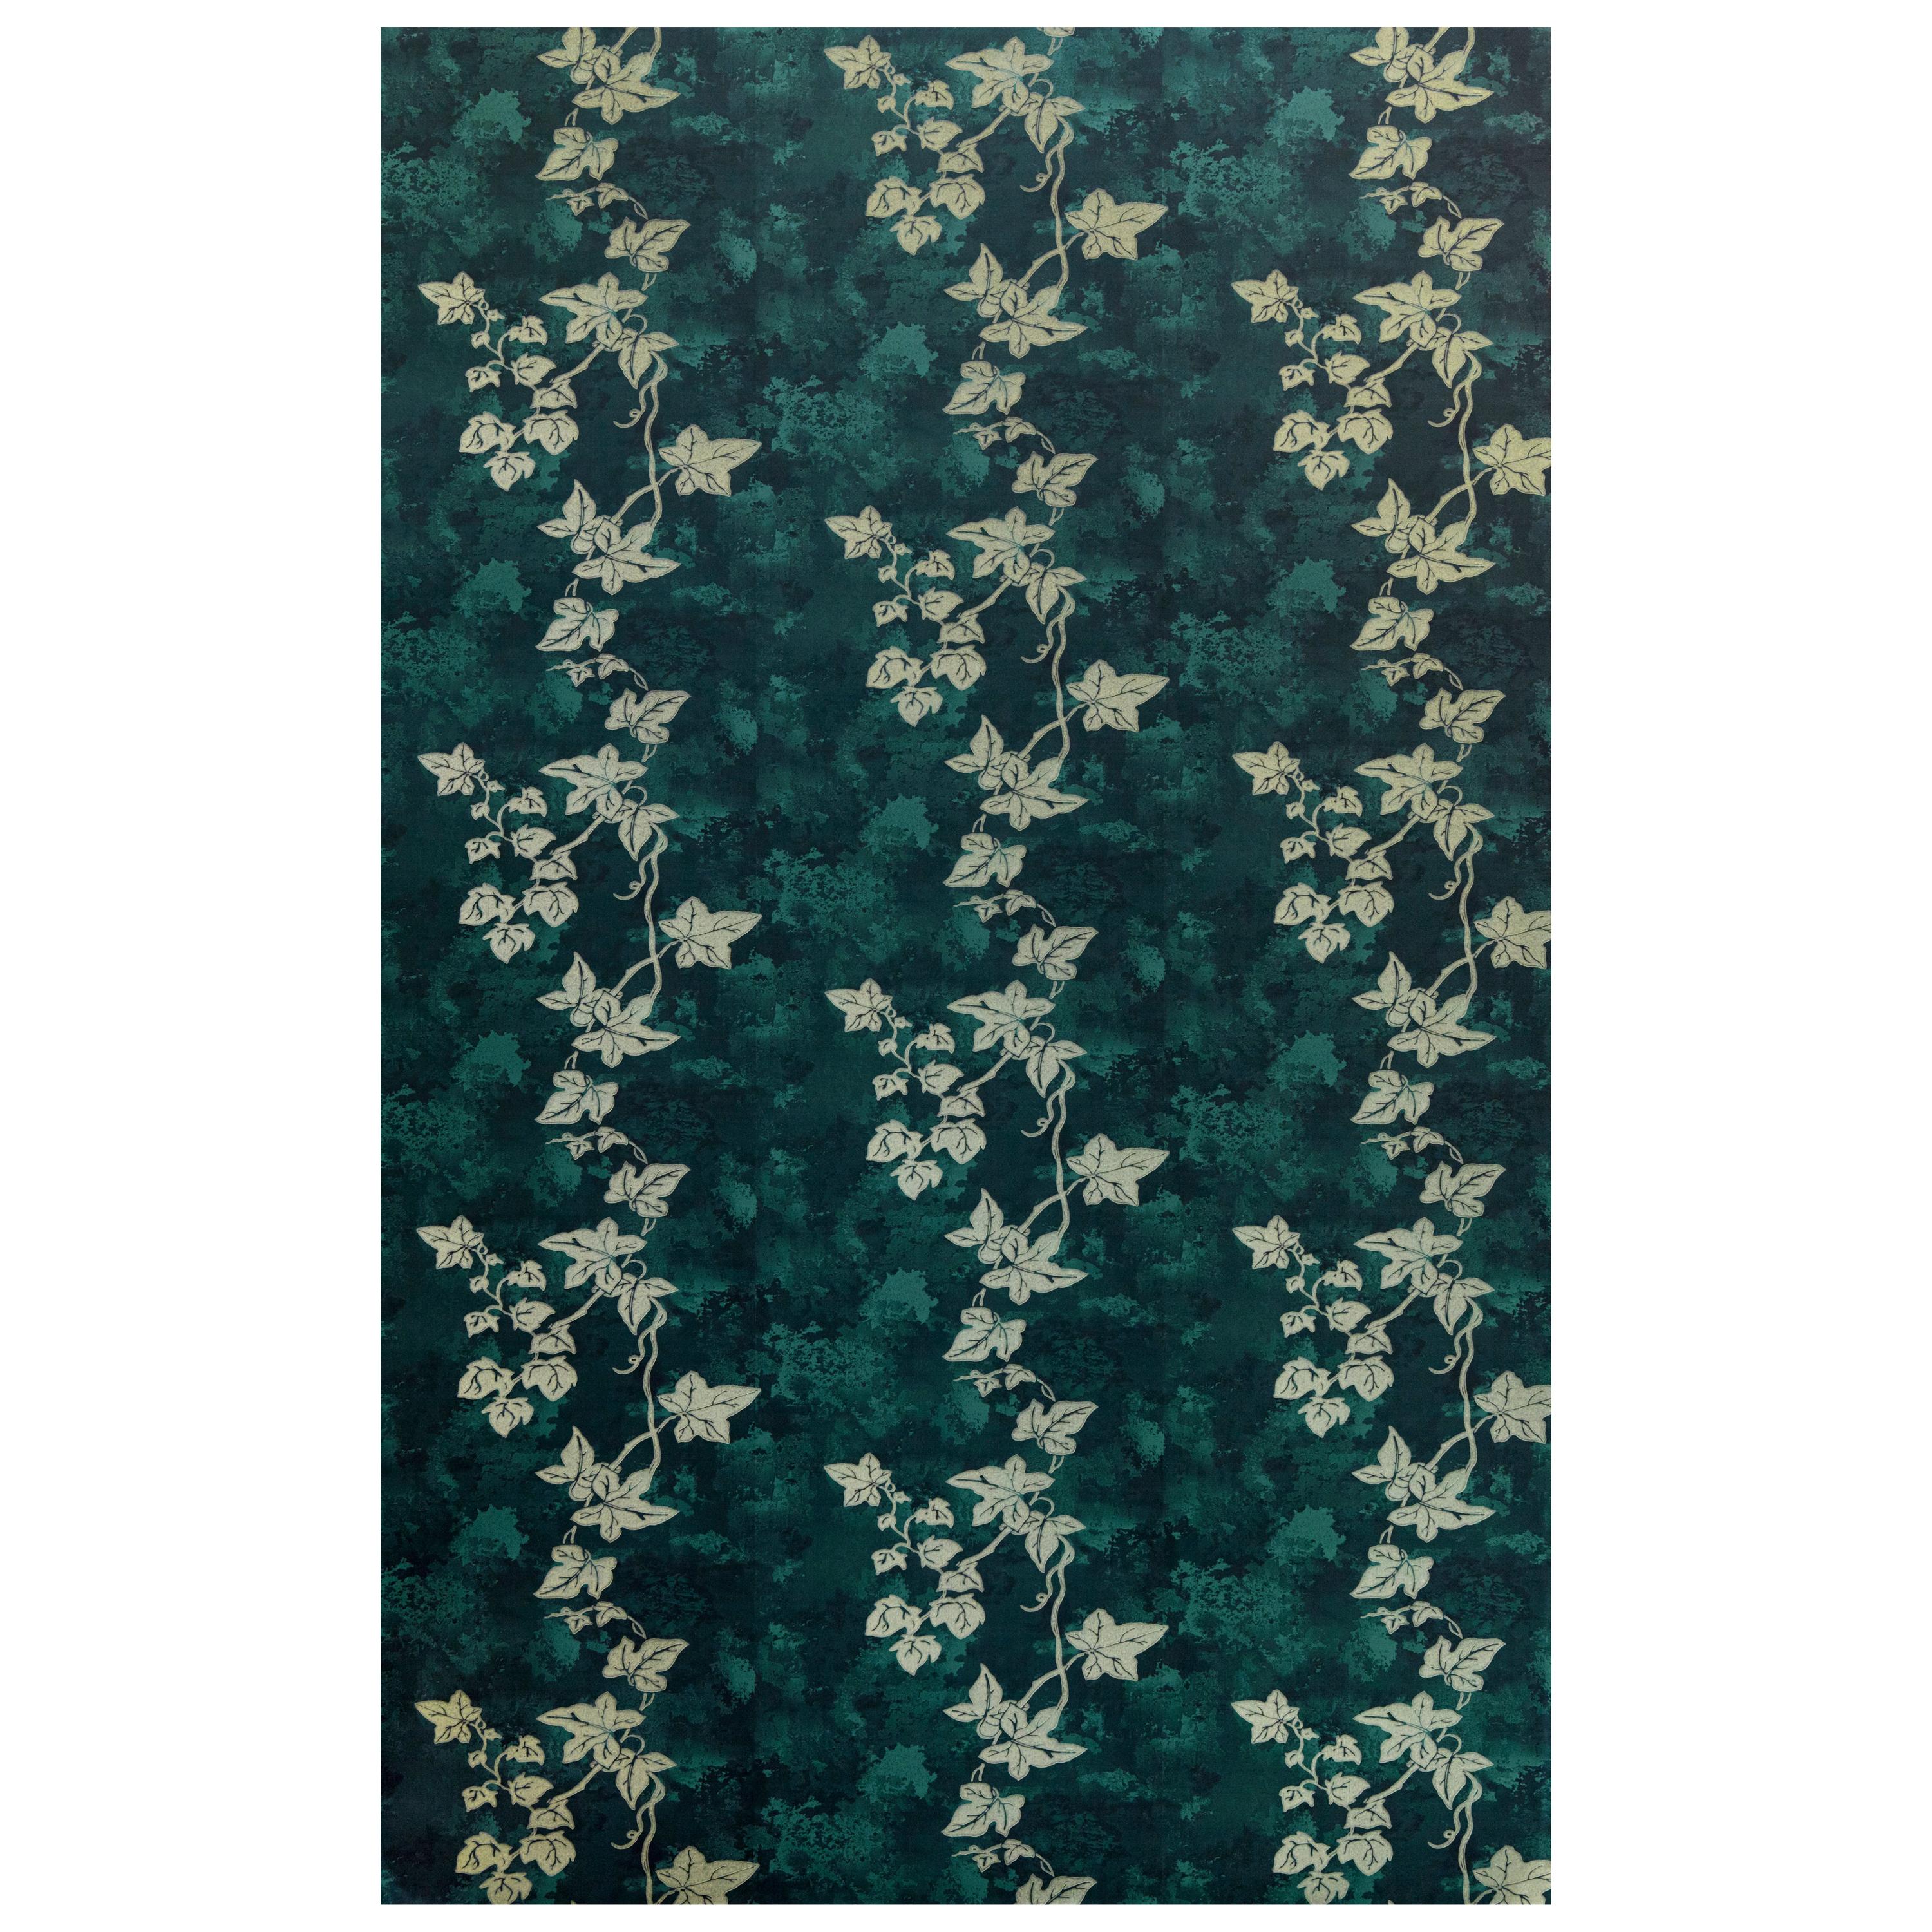 'Ivy' Contemporary, Traditional Wallpaper in Deep Green For Sale